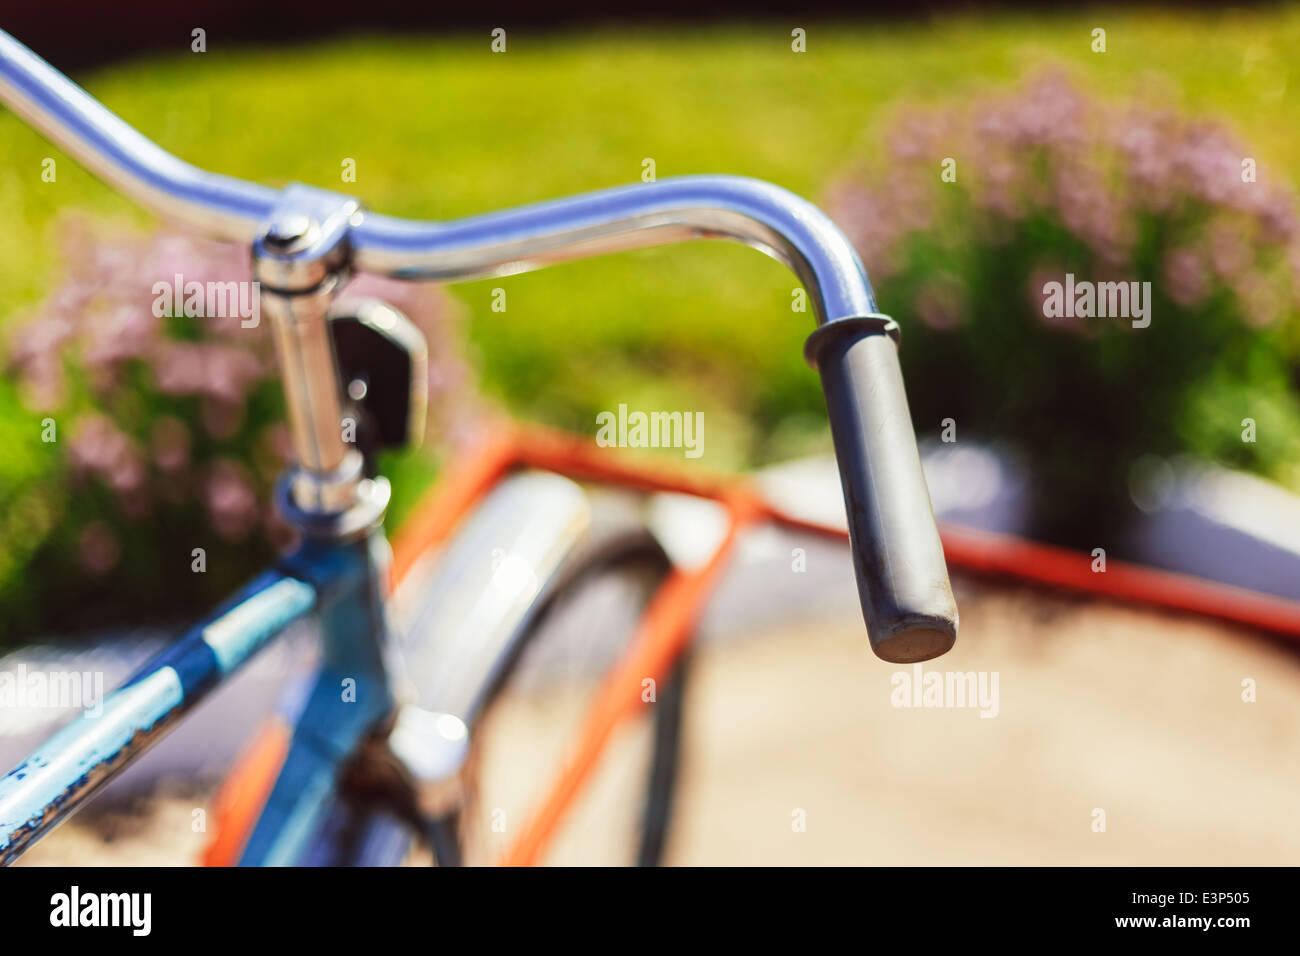 Vintage bicycle handlebar detail close up with parking bokeh background in flower bed in sunny day Stock Photo